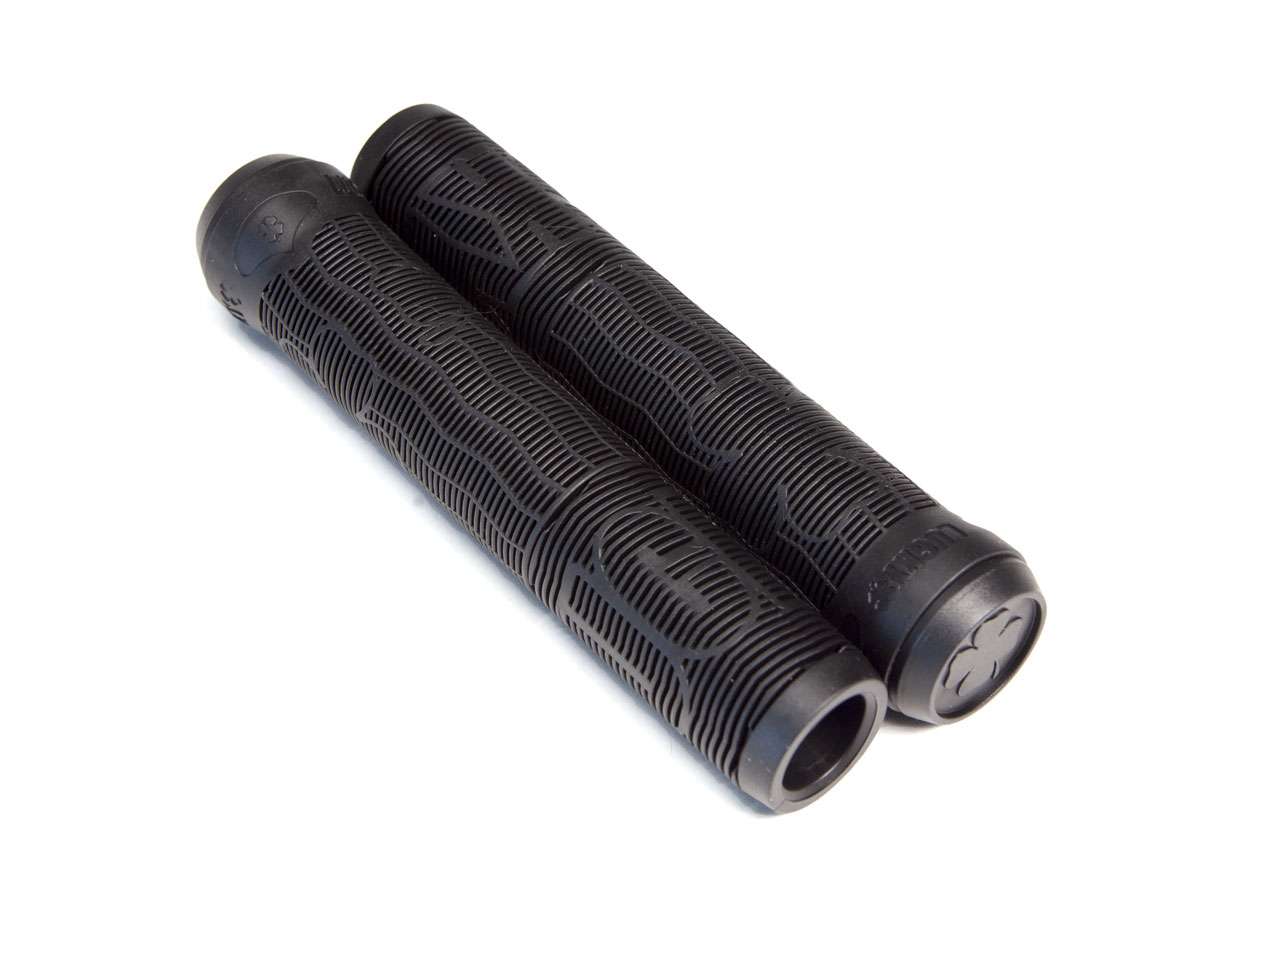 VICEGRIPS™ 2.0 Pro Scooter Grips Black